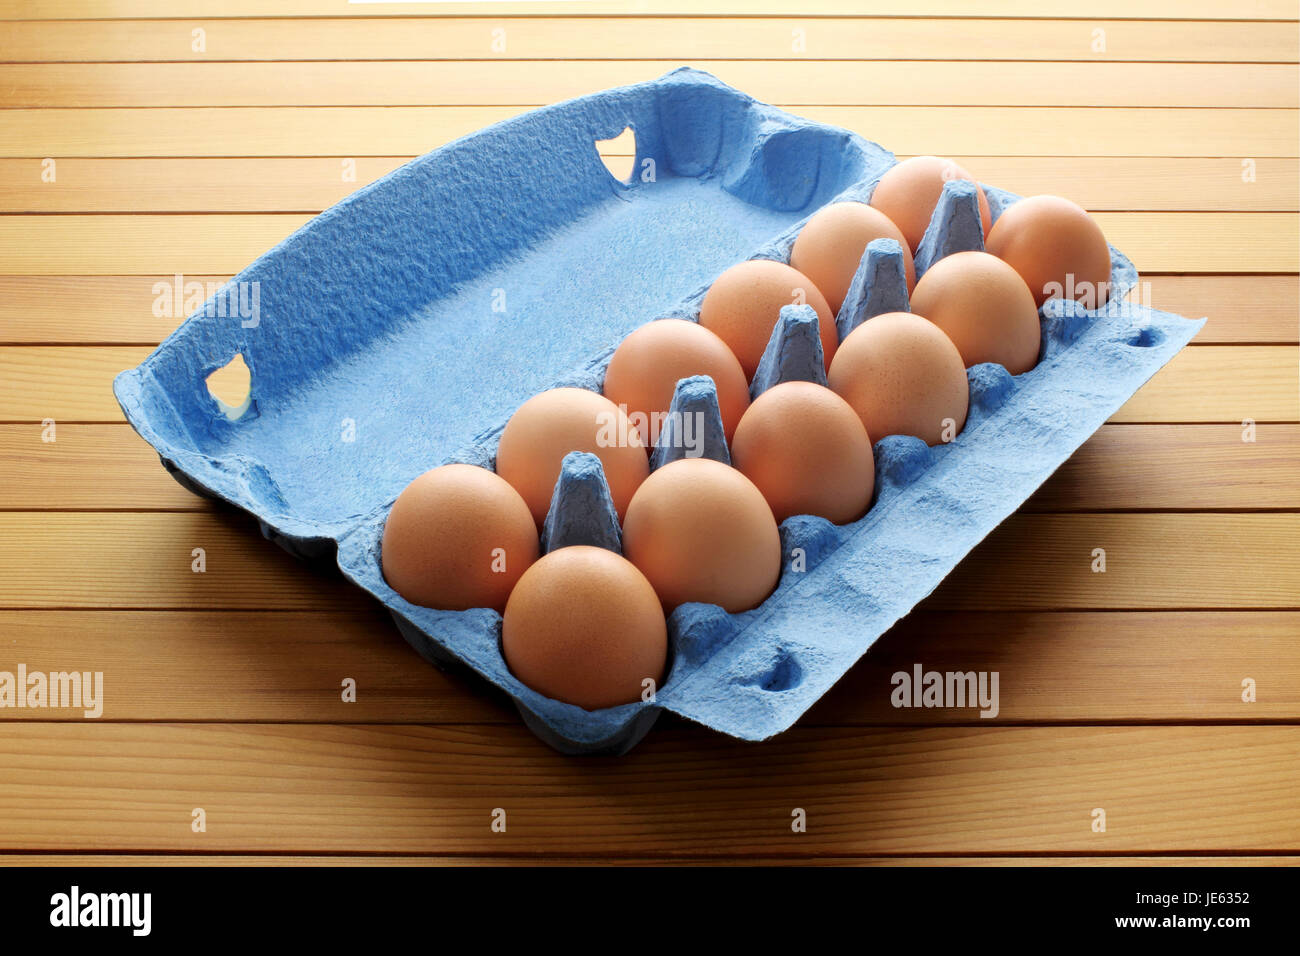 Eggs in Egg Carton on Wooden Background Stock Photo